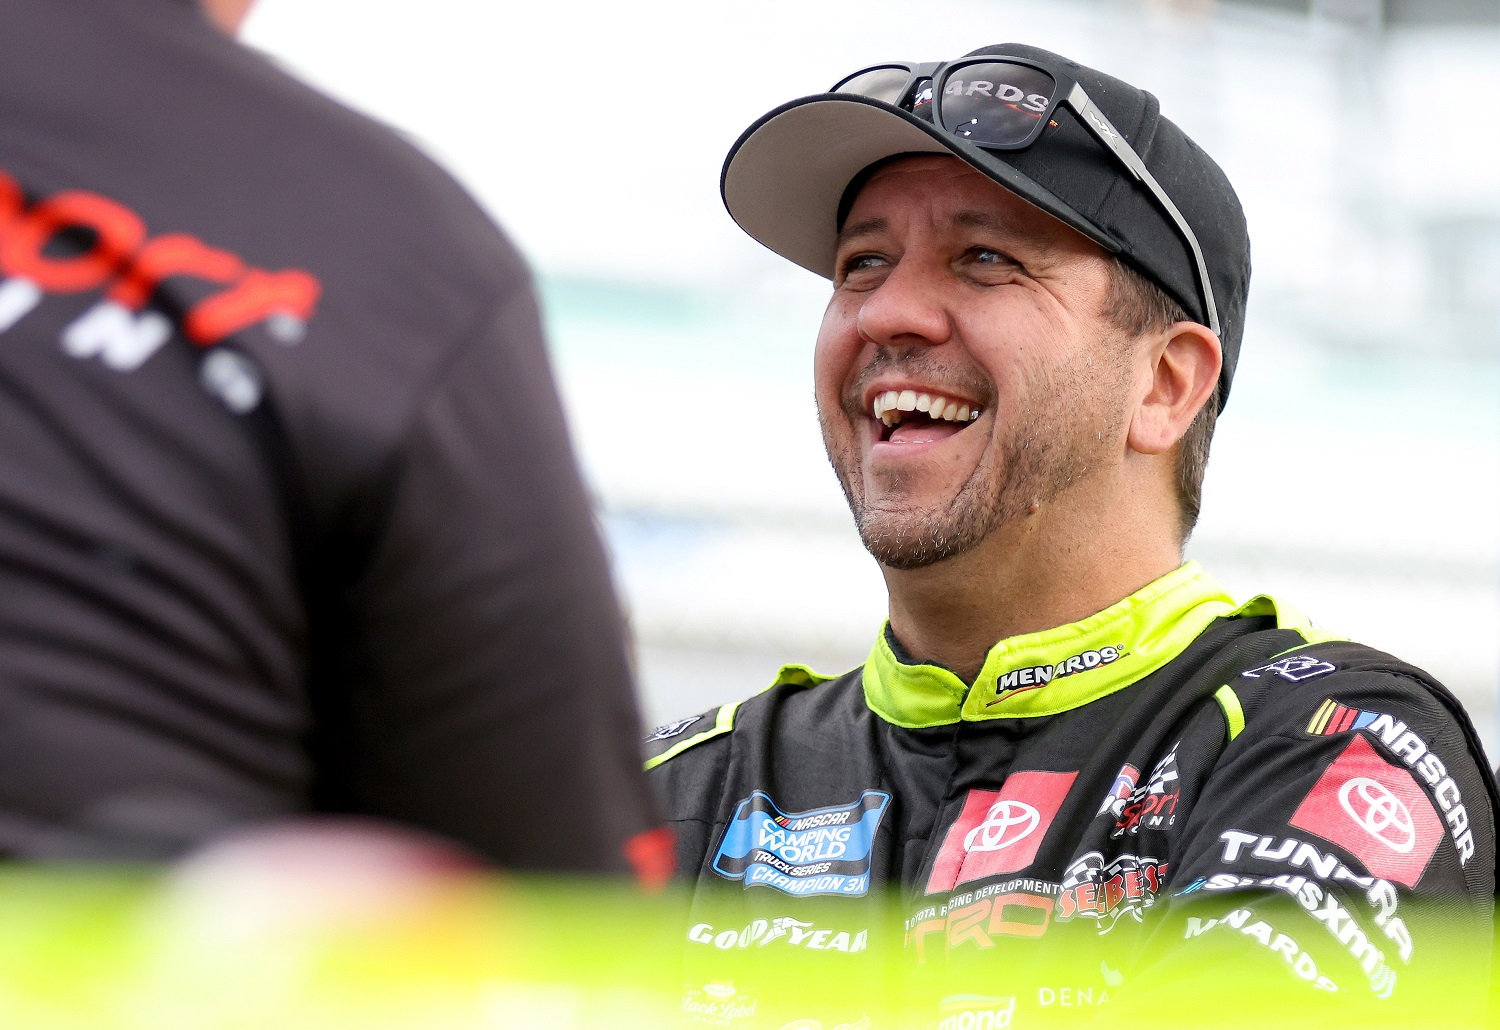 Matt Crafton laughs with his crew on the grid during qualifying for the NASCAR Camping World Truck Series Baptist Health 200 at Homestead-Miami Speedway on October 21, 2022. |  Jared East/Getty Images